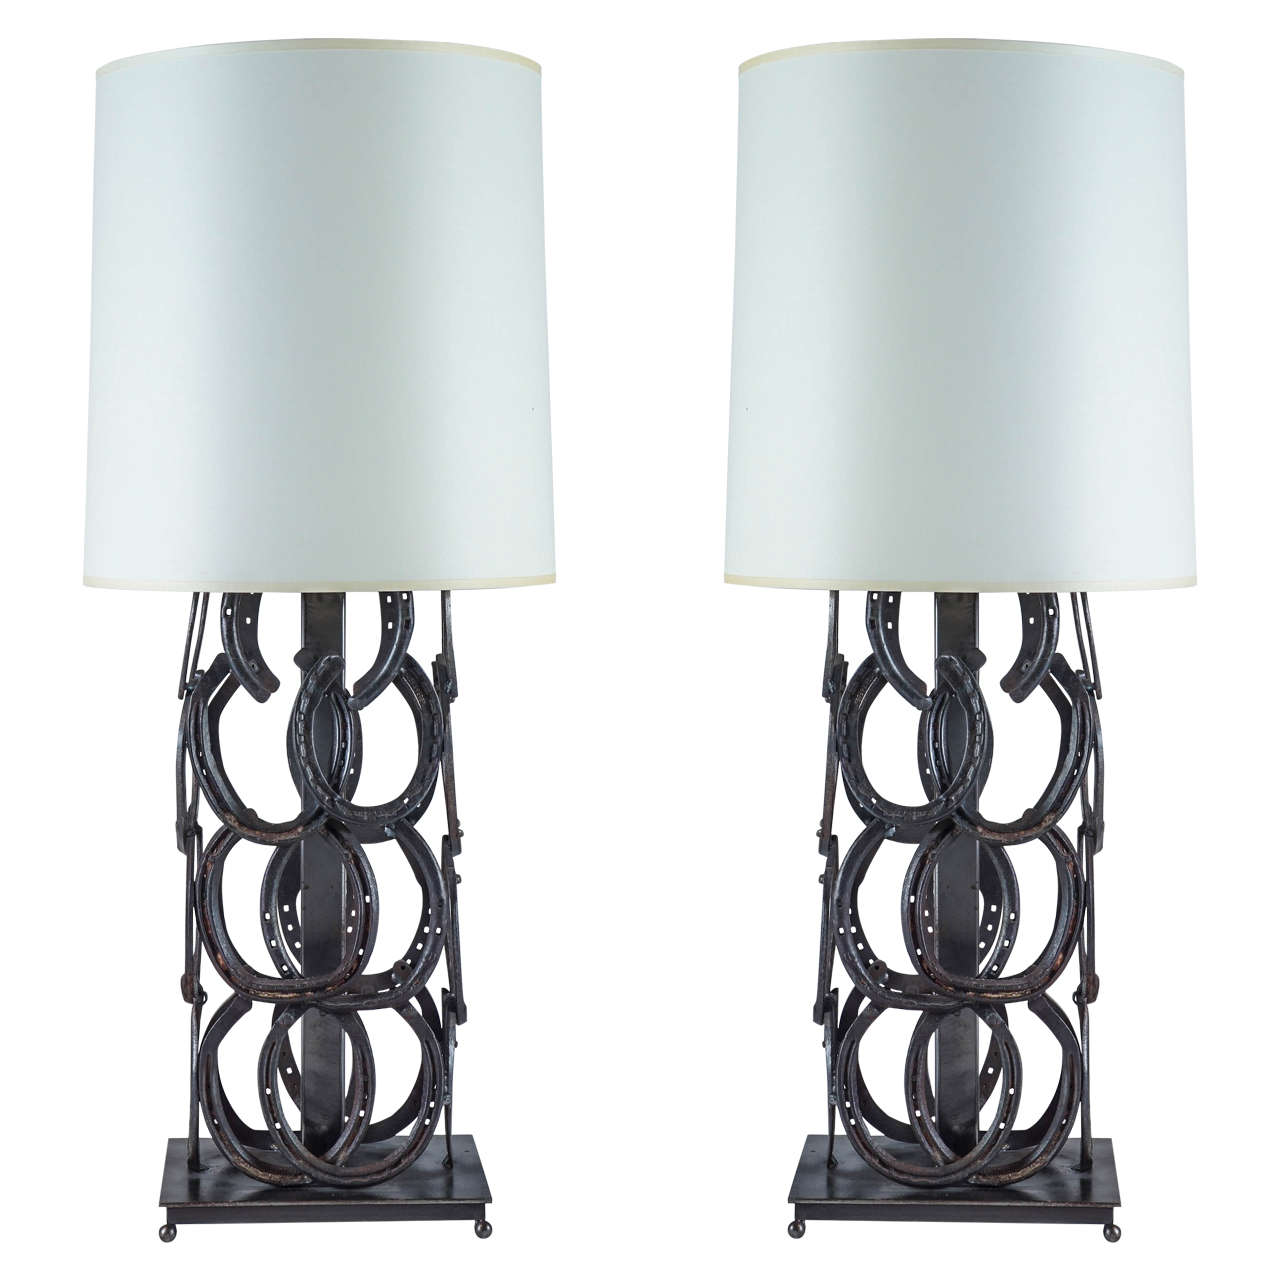 Pair of Stacked Horseshoe Table Lamps